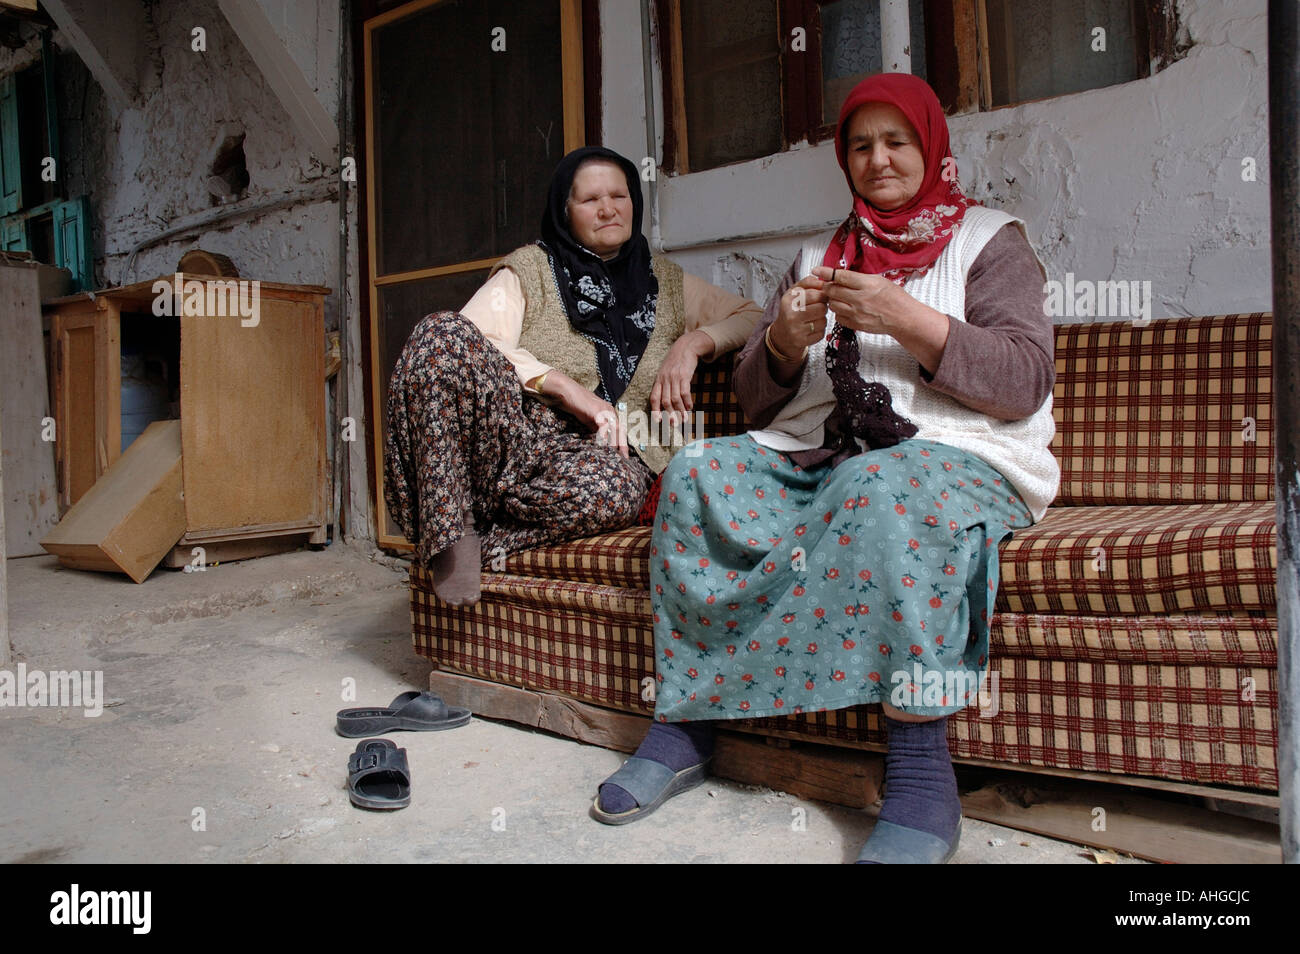 Women knitting and lacemaking in side street in Kalcan in Southern Turkey. Stock Photo